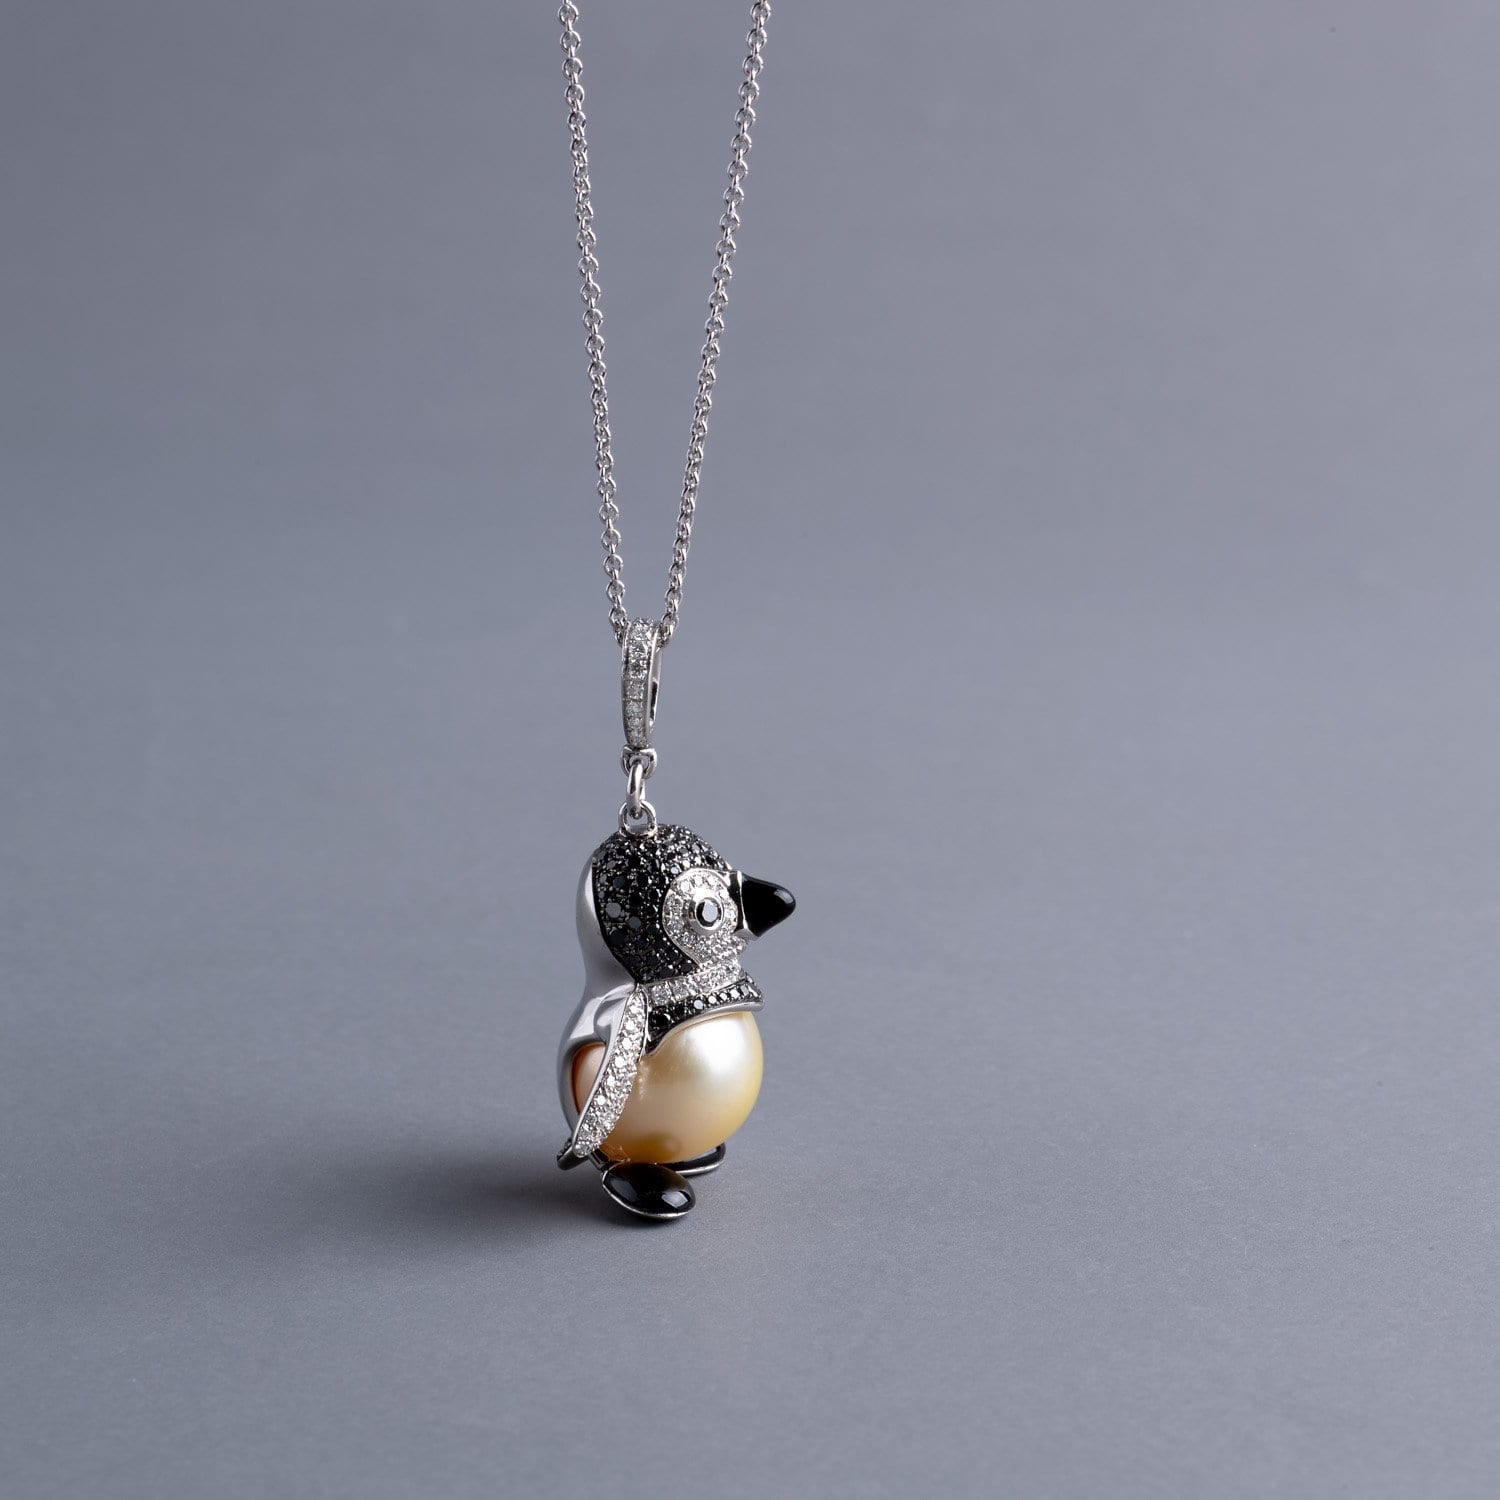 VINTAGE: Wild Life  Penguin with Pearl Pendant